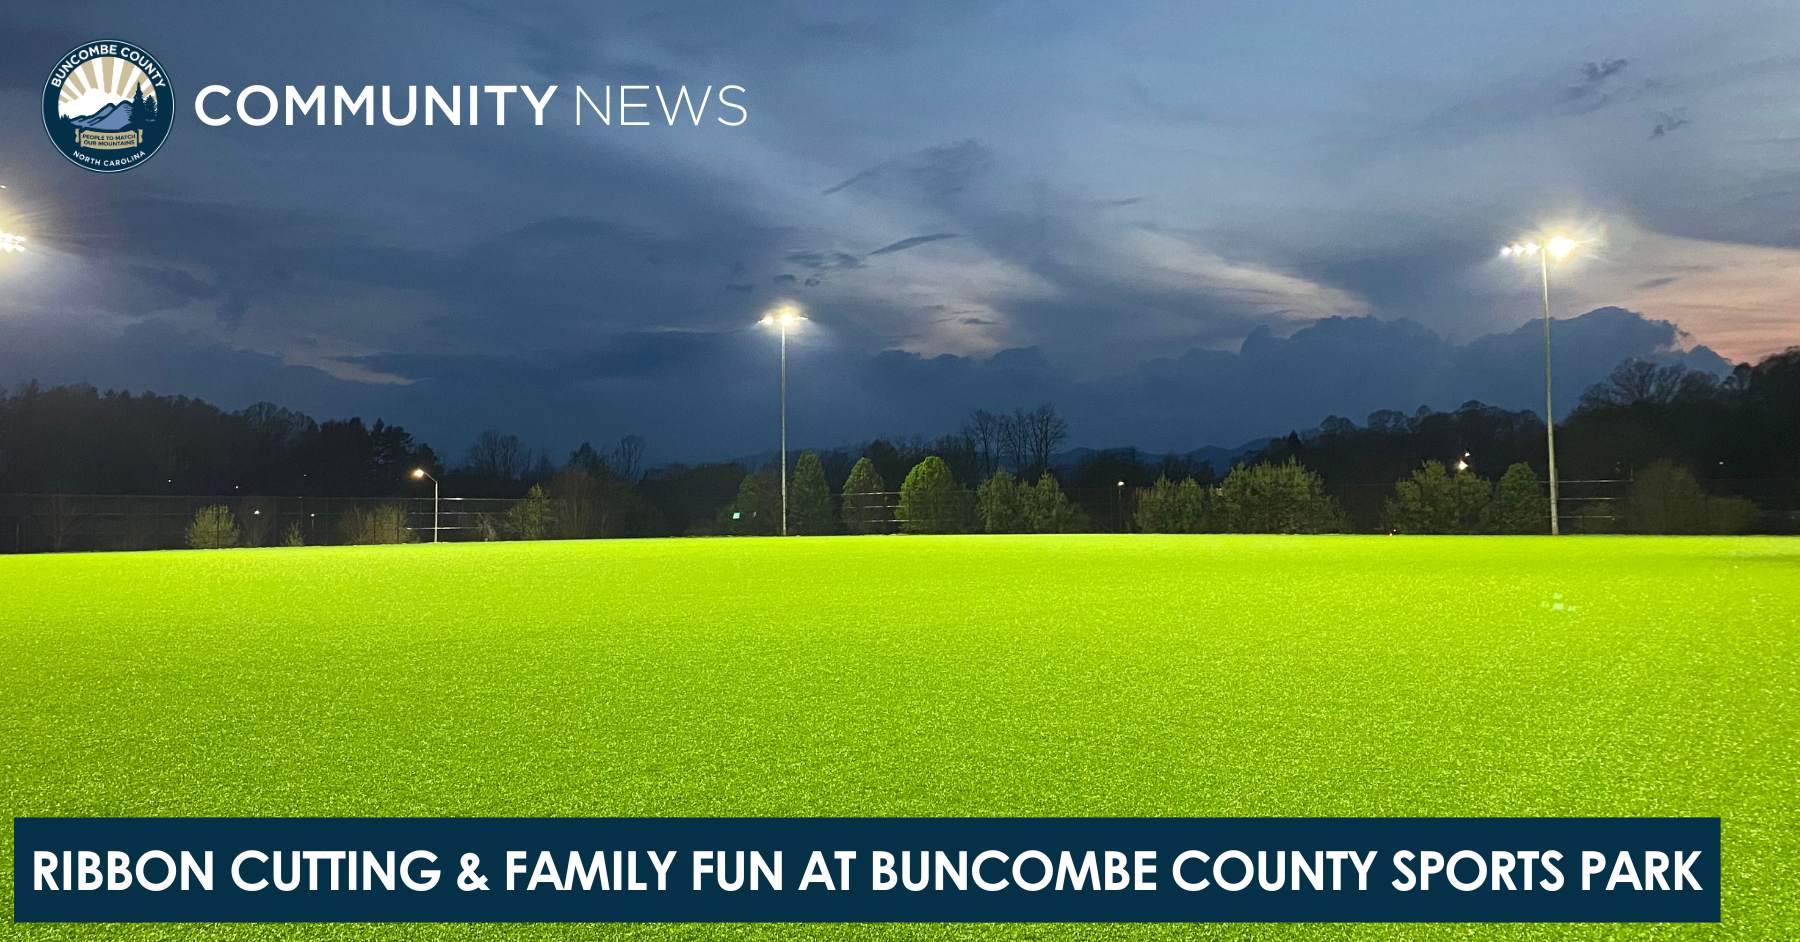 Grand Opening of New Turf Fields at Buncombe County Sports Park with Ribbon Cutting and Family Fun on July 12